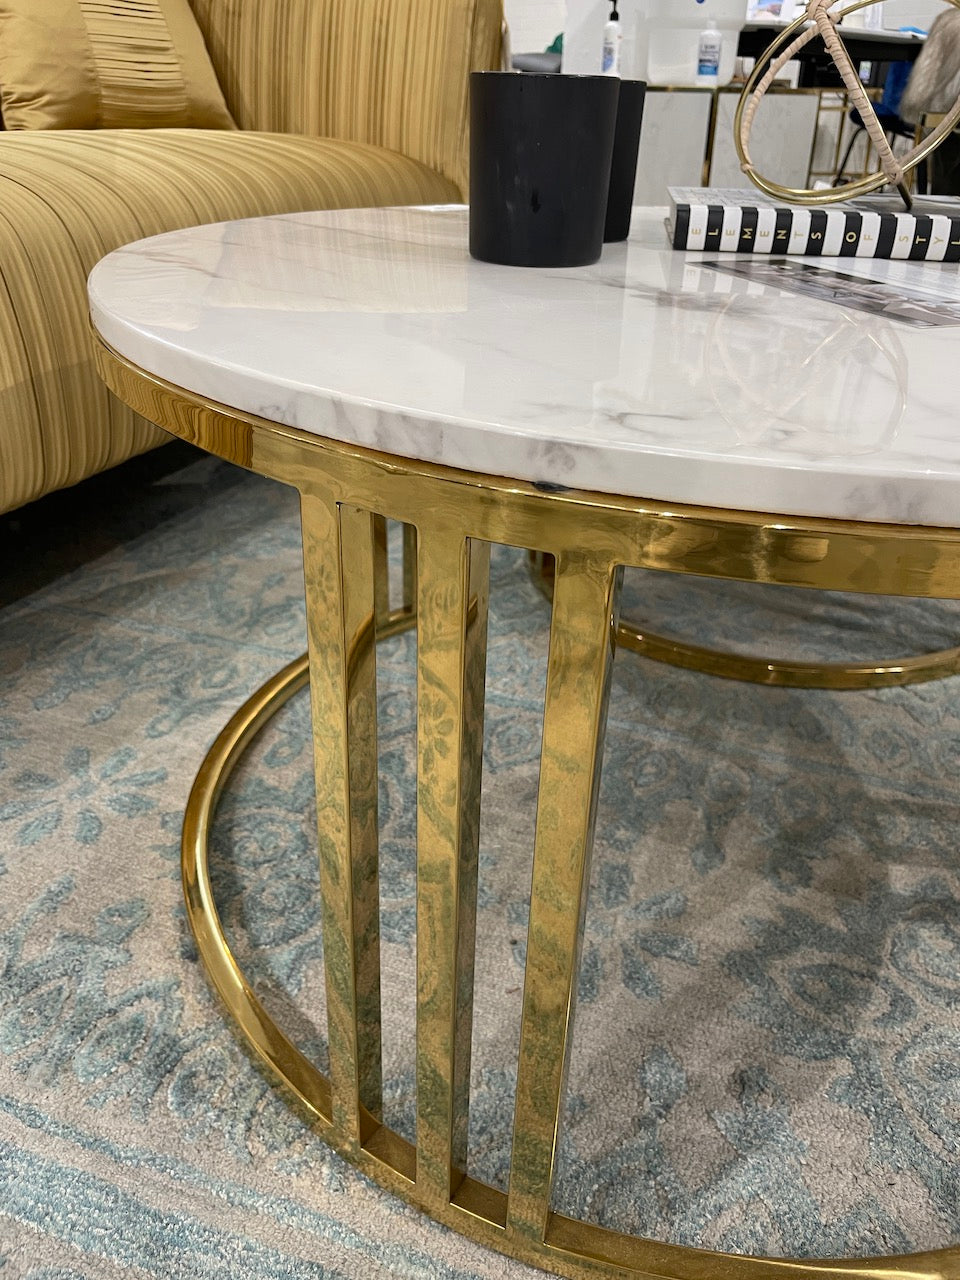 Lustre Coffee Table Set Gold